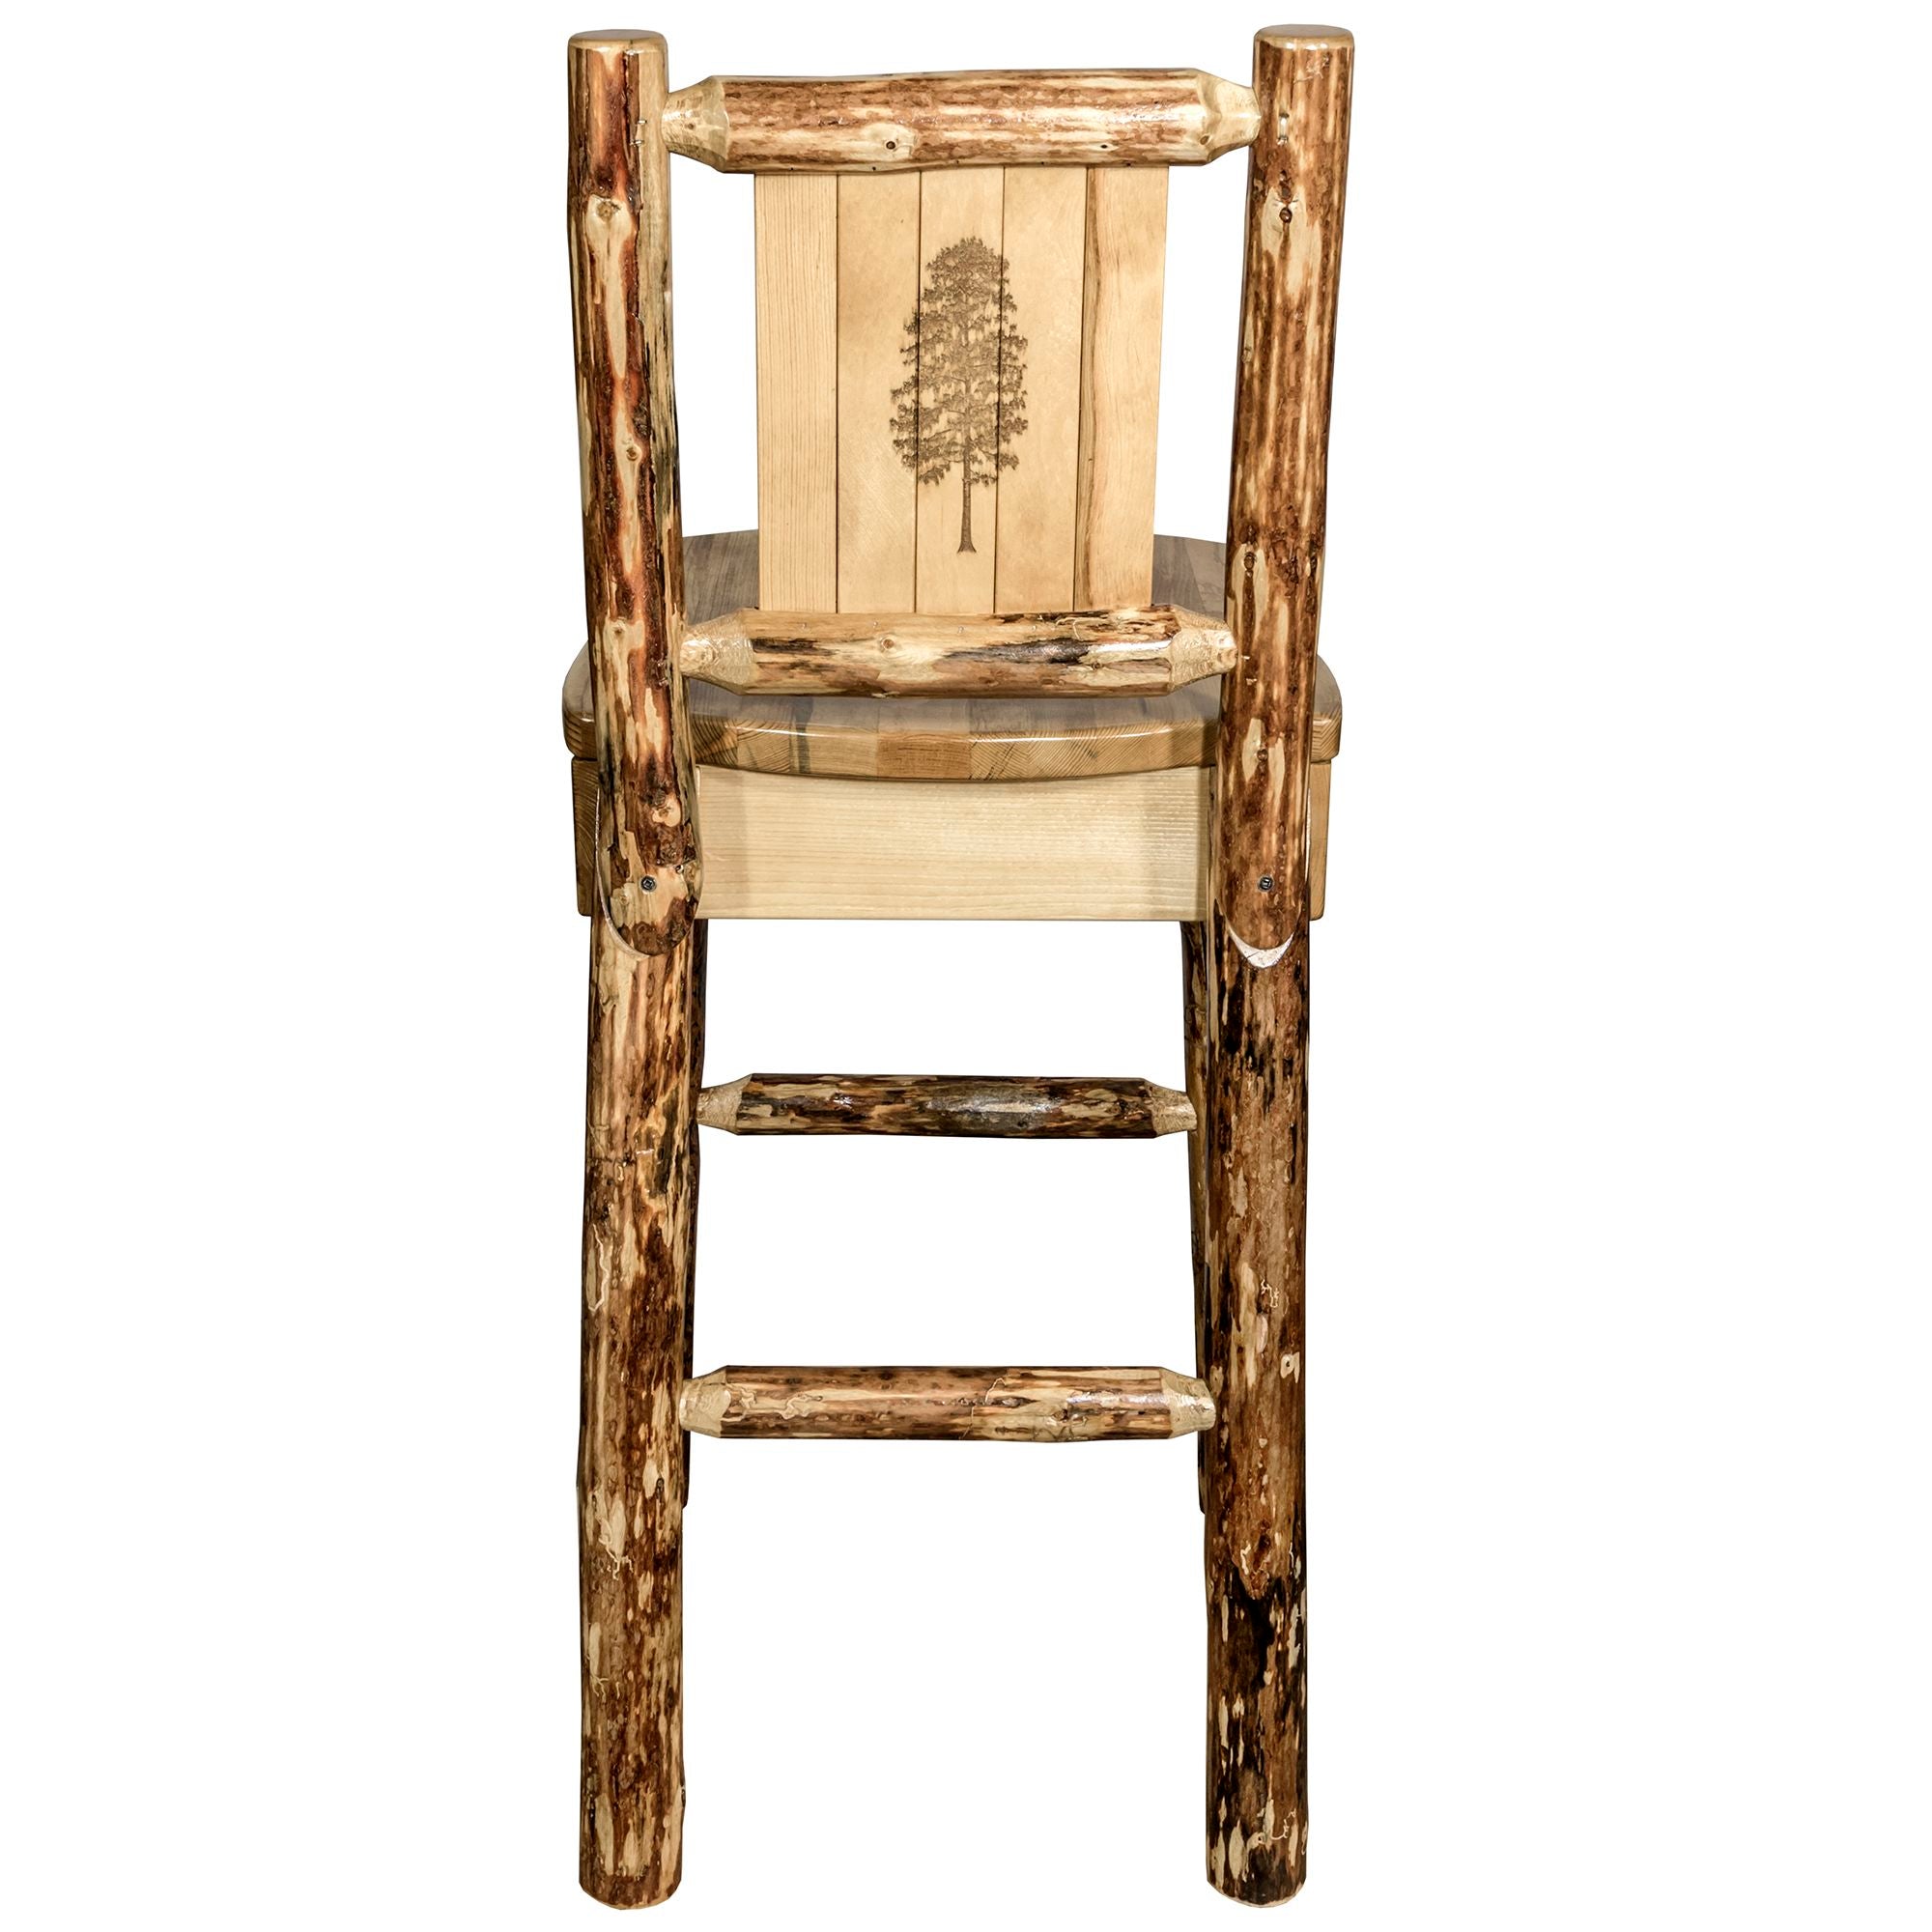 Montana Glacier Country MWGCBSWNRLZPINE Barstool With Back and Laser Engraved Pine Tree Design